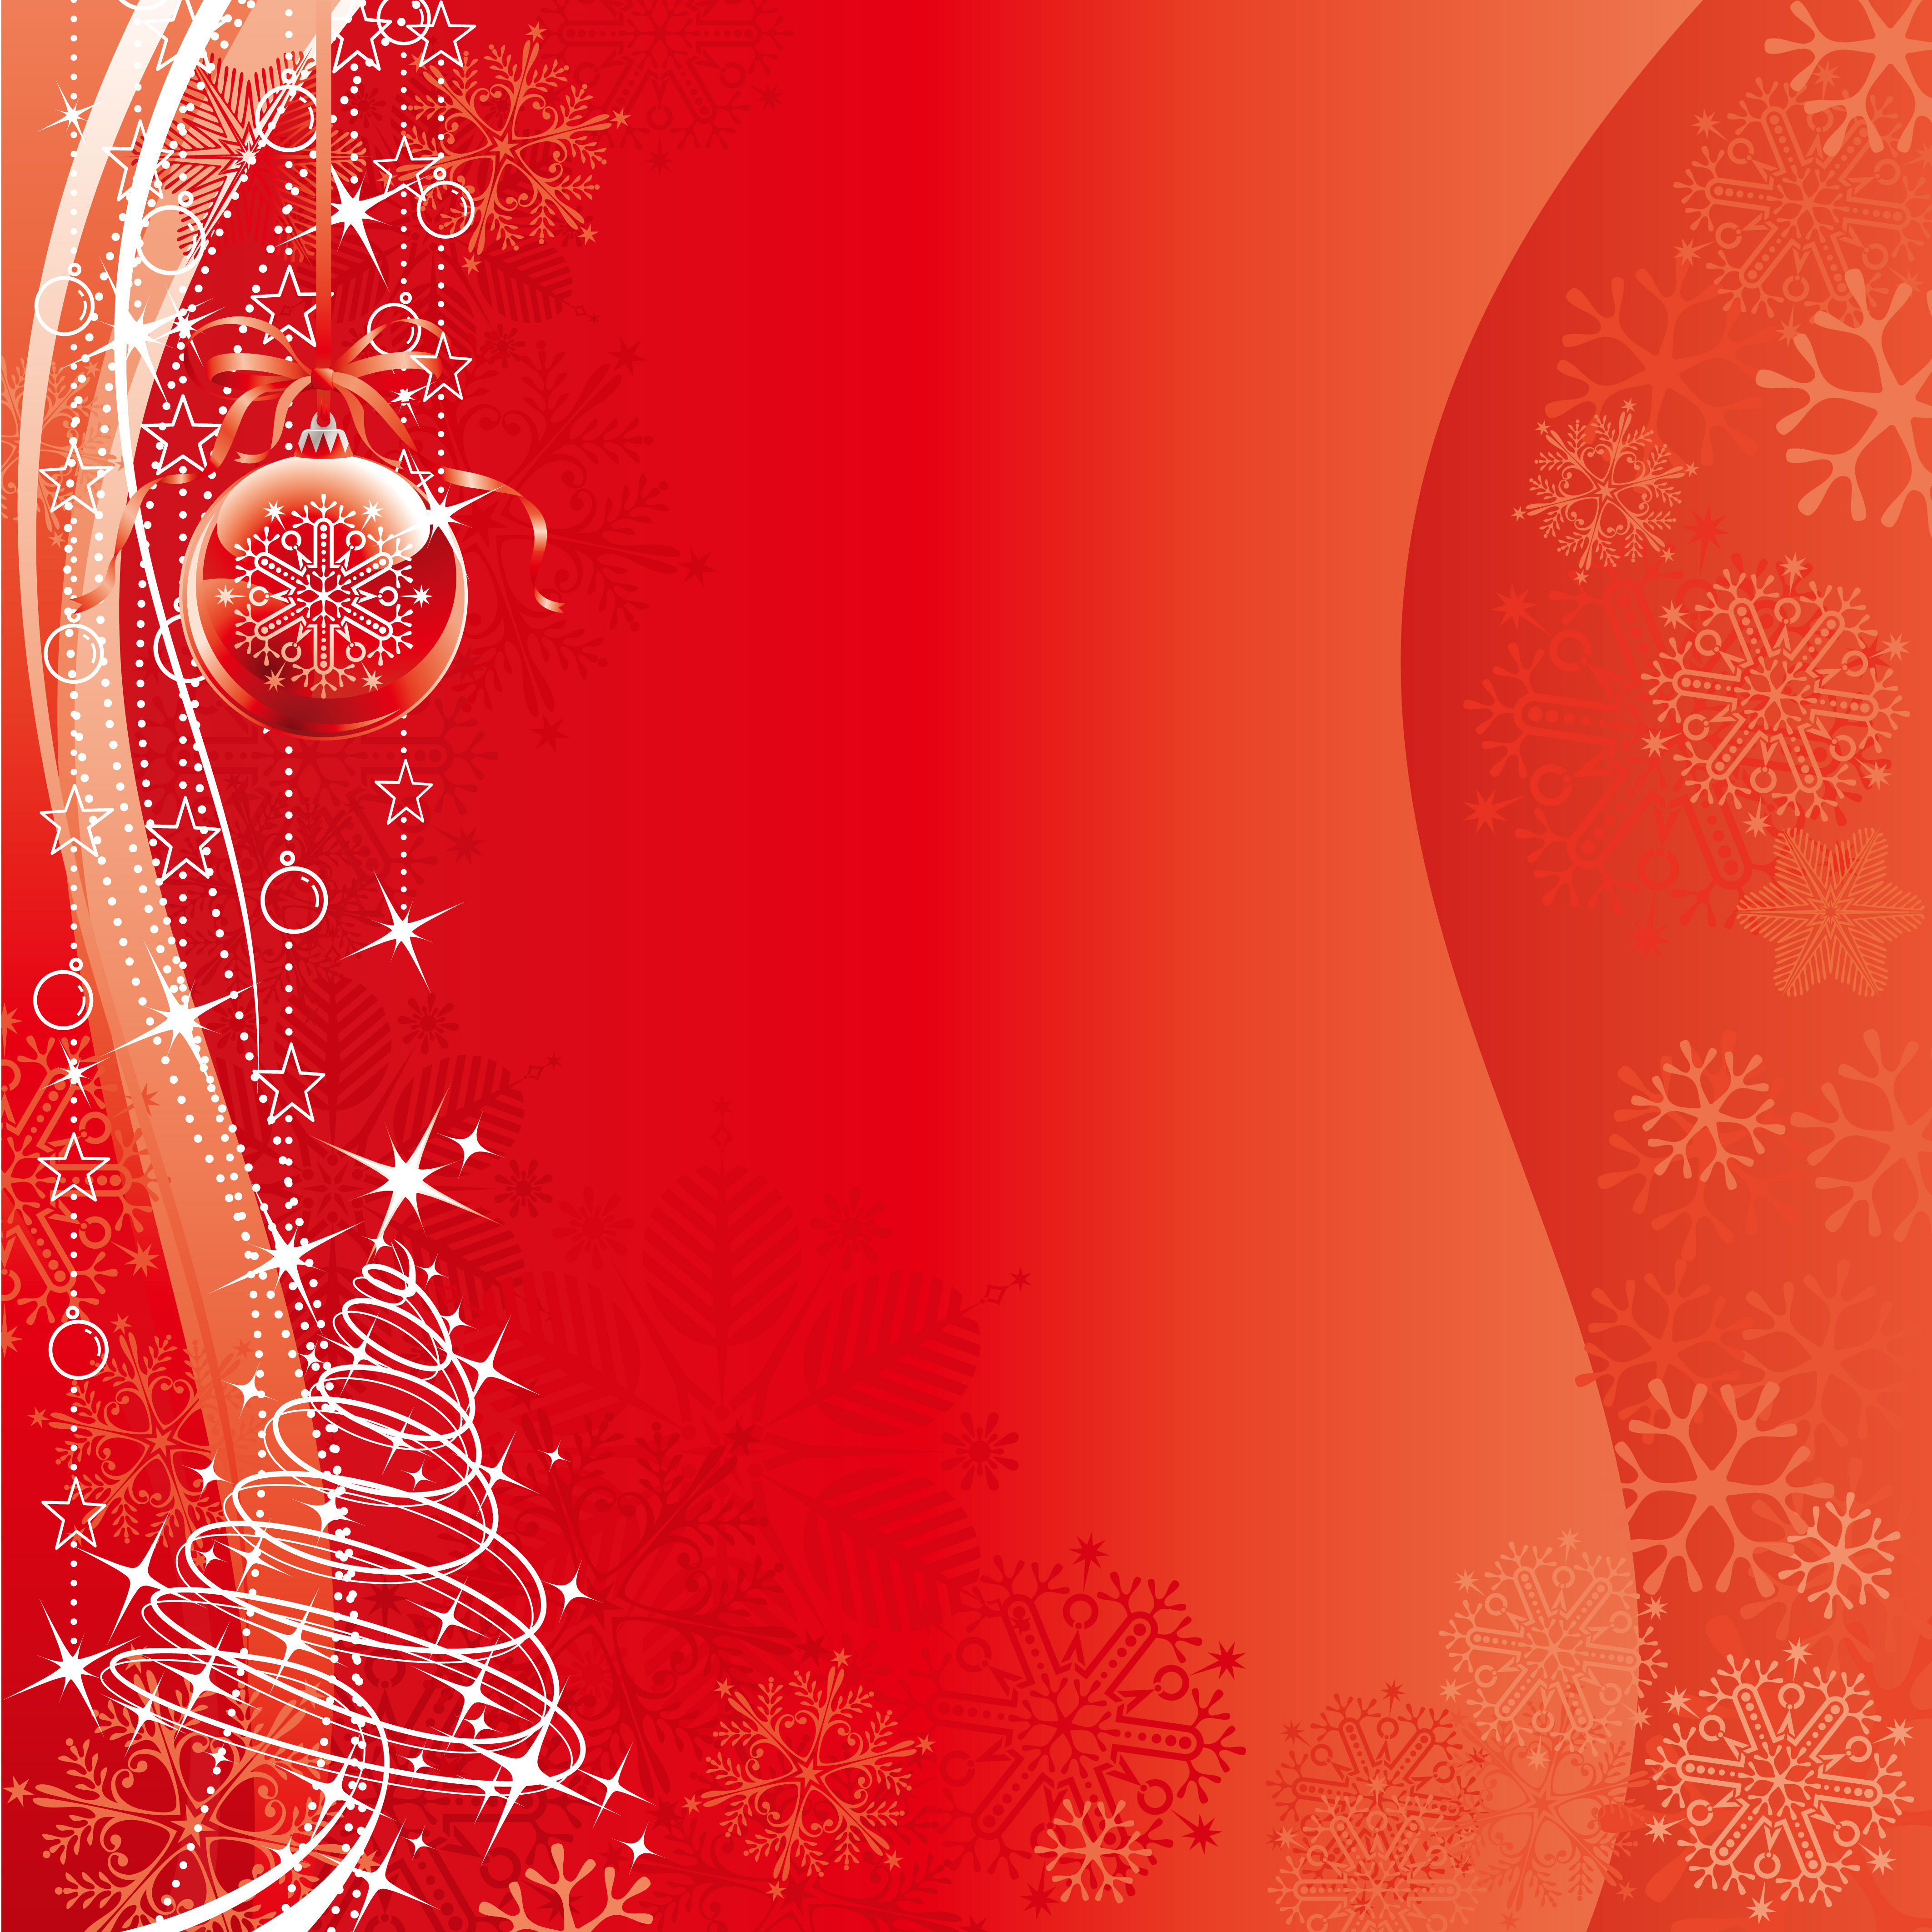 Free Christmas Holiday Card Background